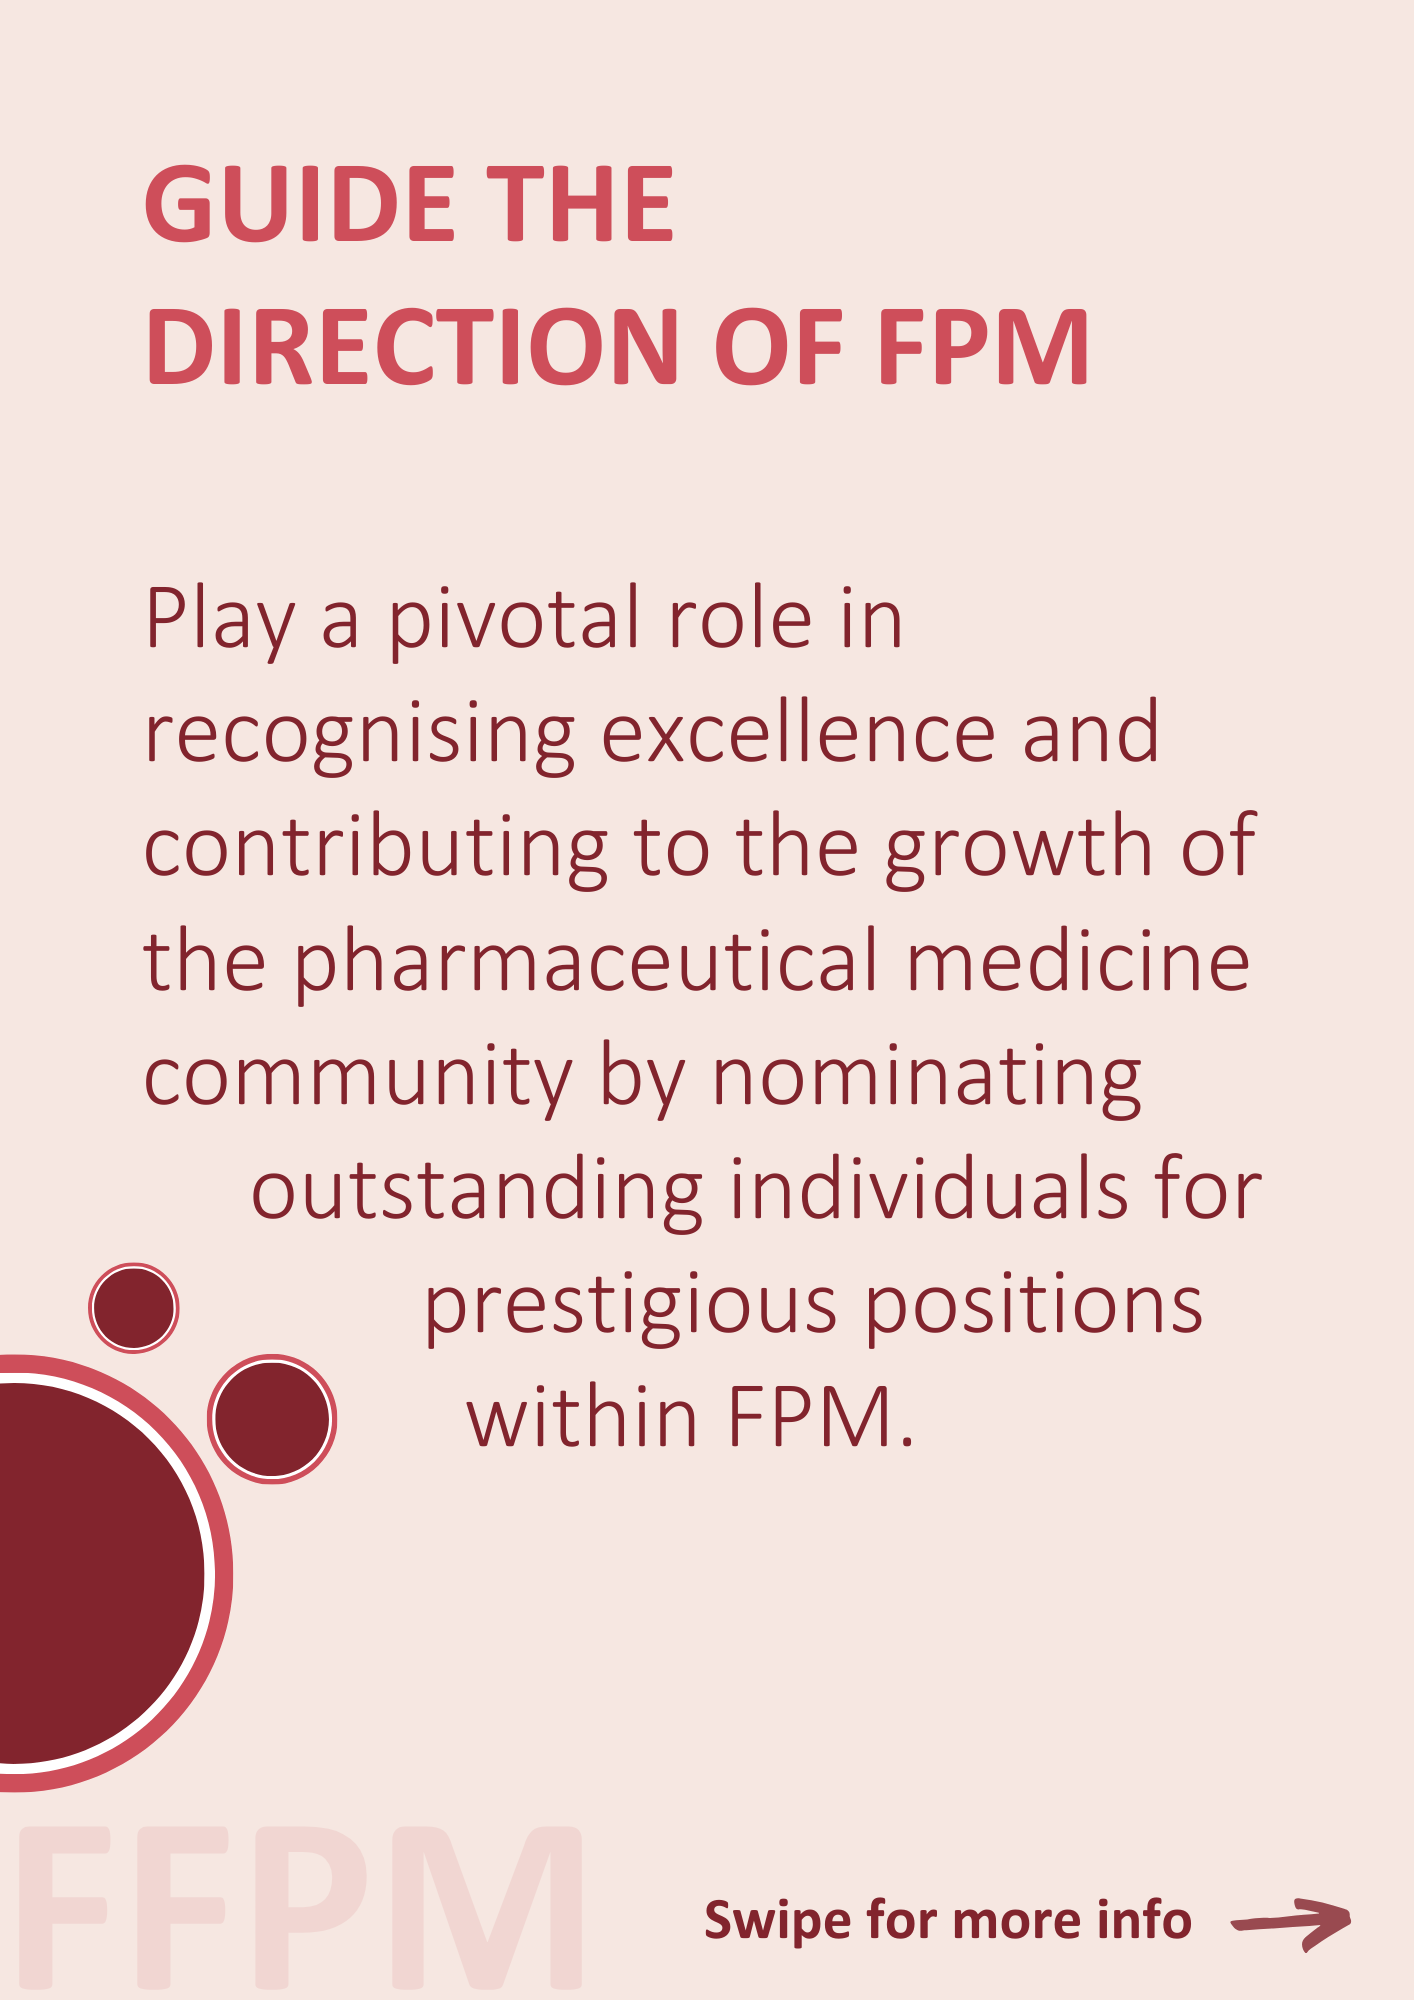 GUIDE THE DIRECTION OF FPM Play a pivotal role in recognising excellence and contributing to the growth of the pharmaceutical medicine community by nominating outstanding individuals for prestigious positions within FPM.